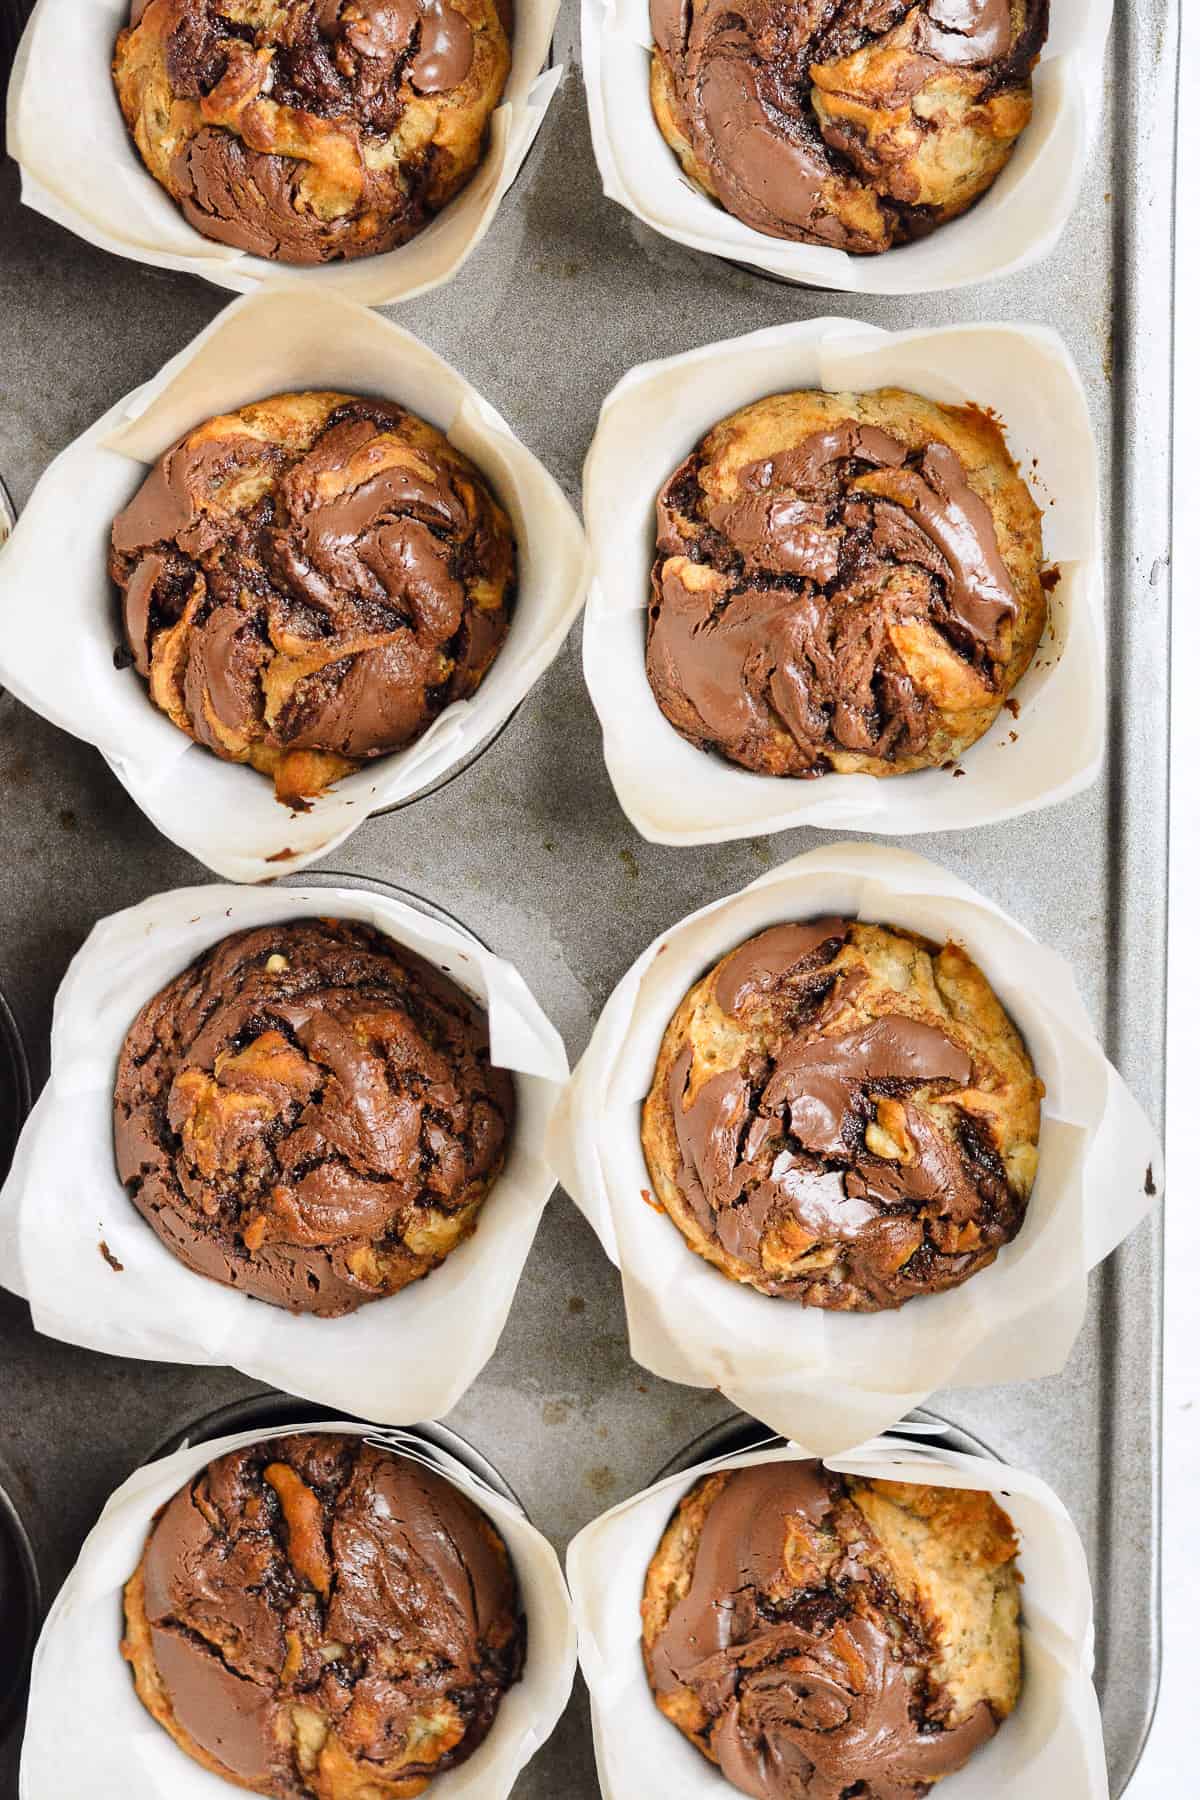 Nutella banana muffins in liners in the muffin tin.